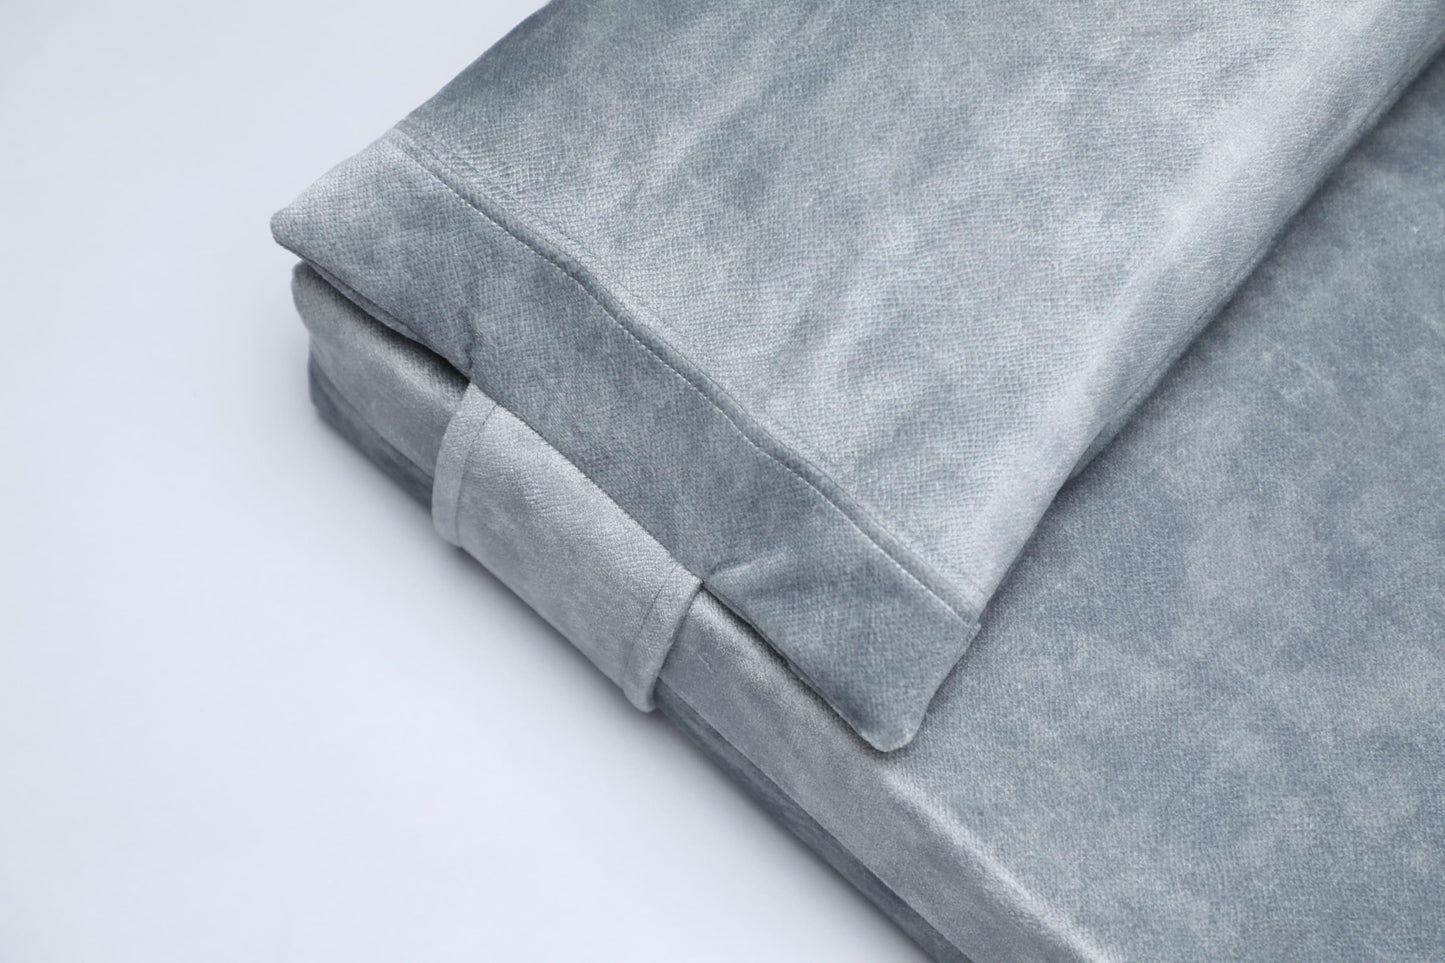 Dog bed for large dogs | Extra comfort & support | 2-sided | METAL GREY - premium dog goods handmade in Europe by My Wild Other